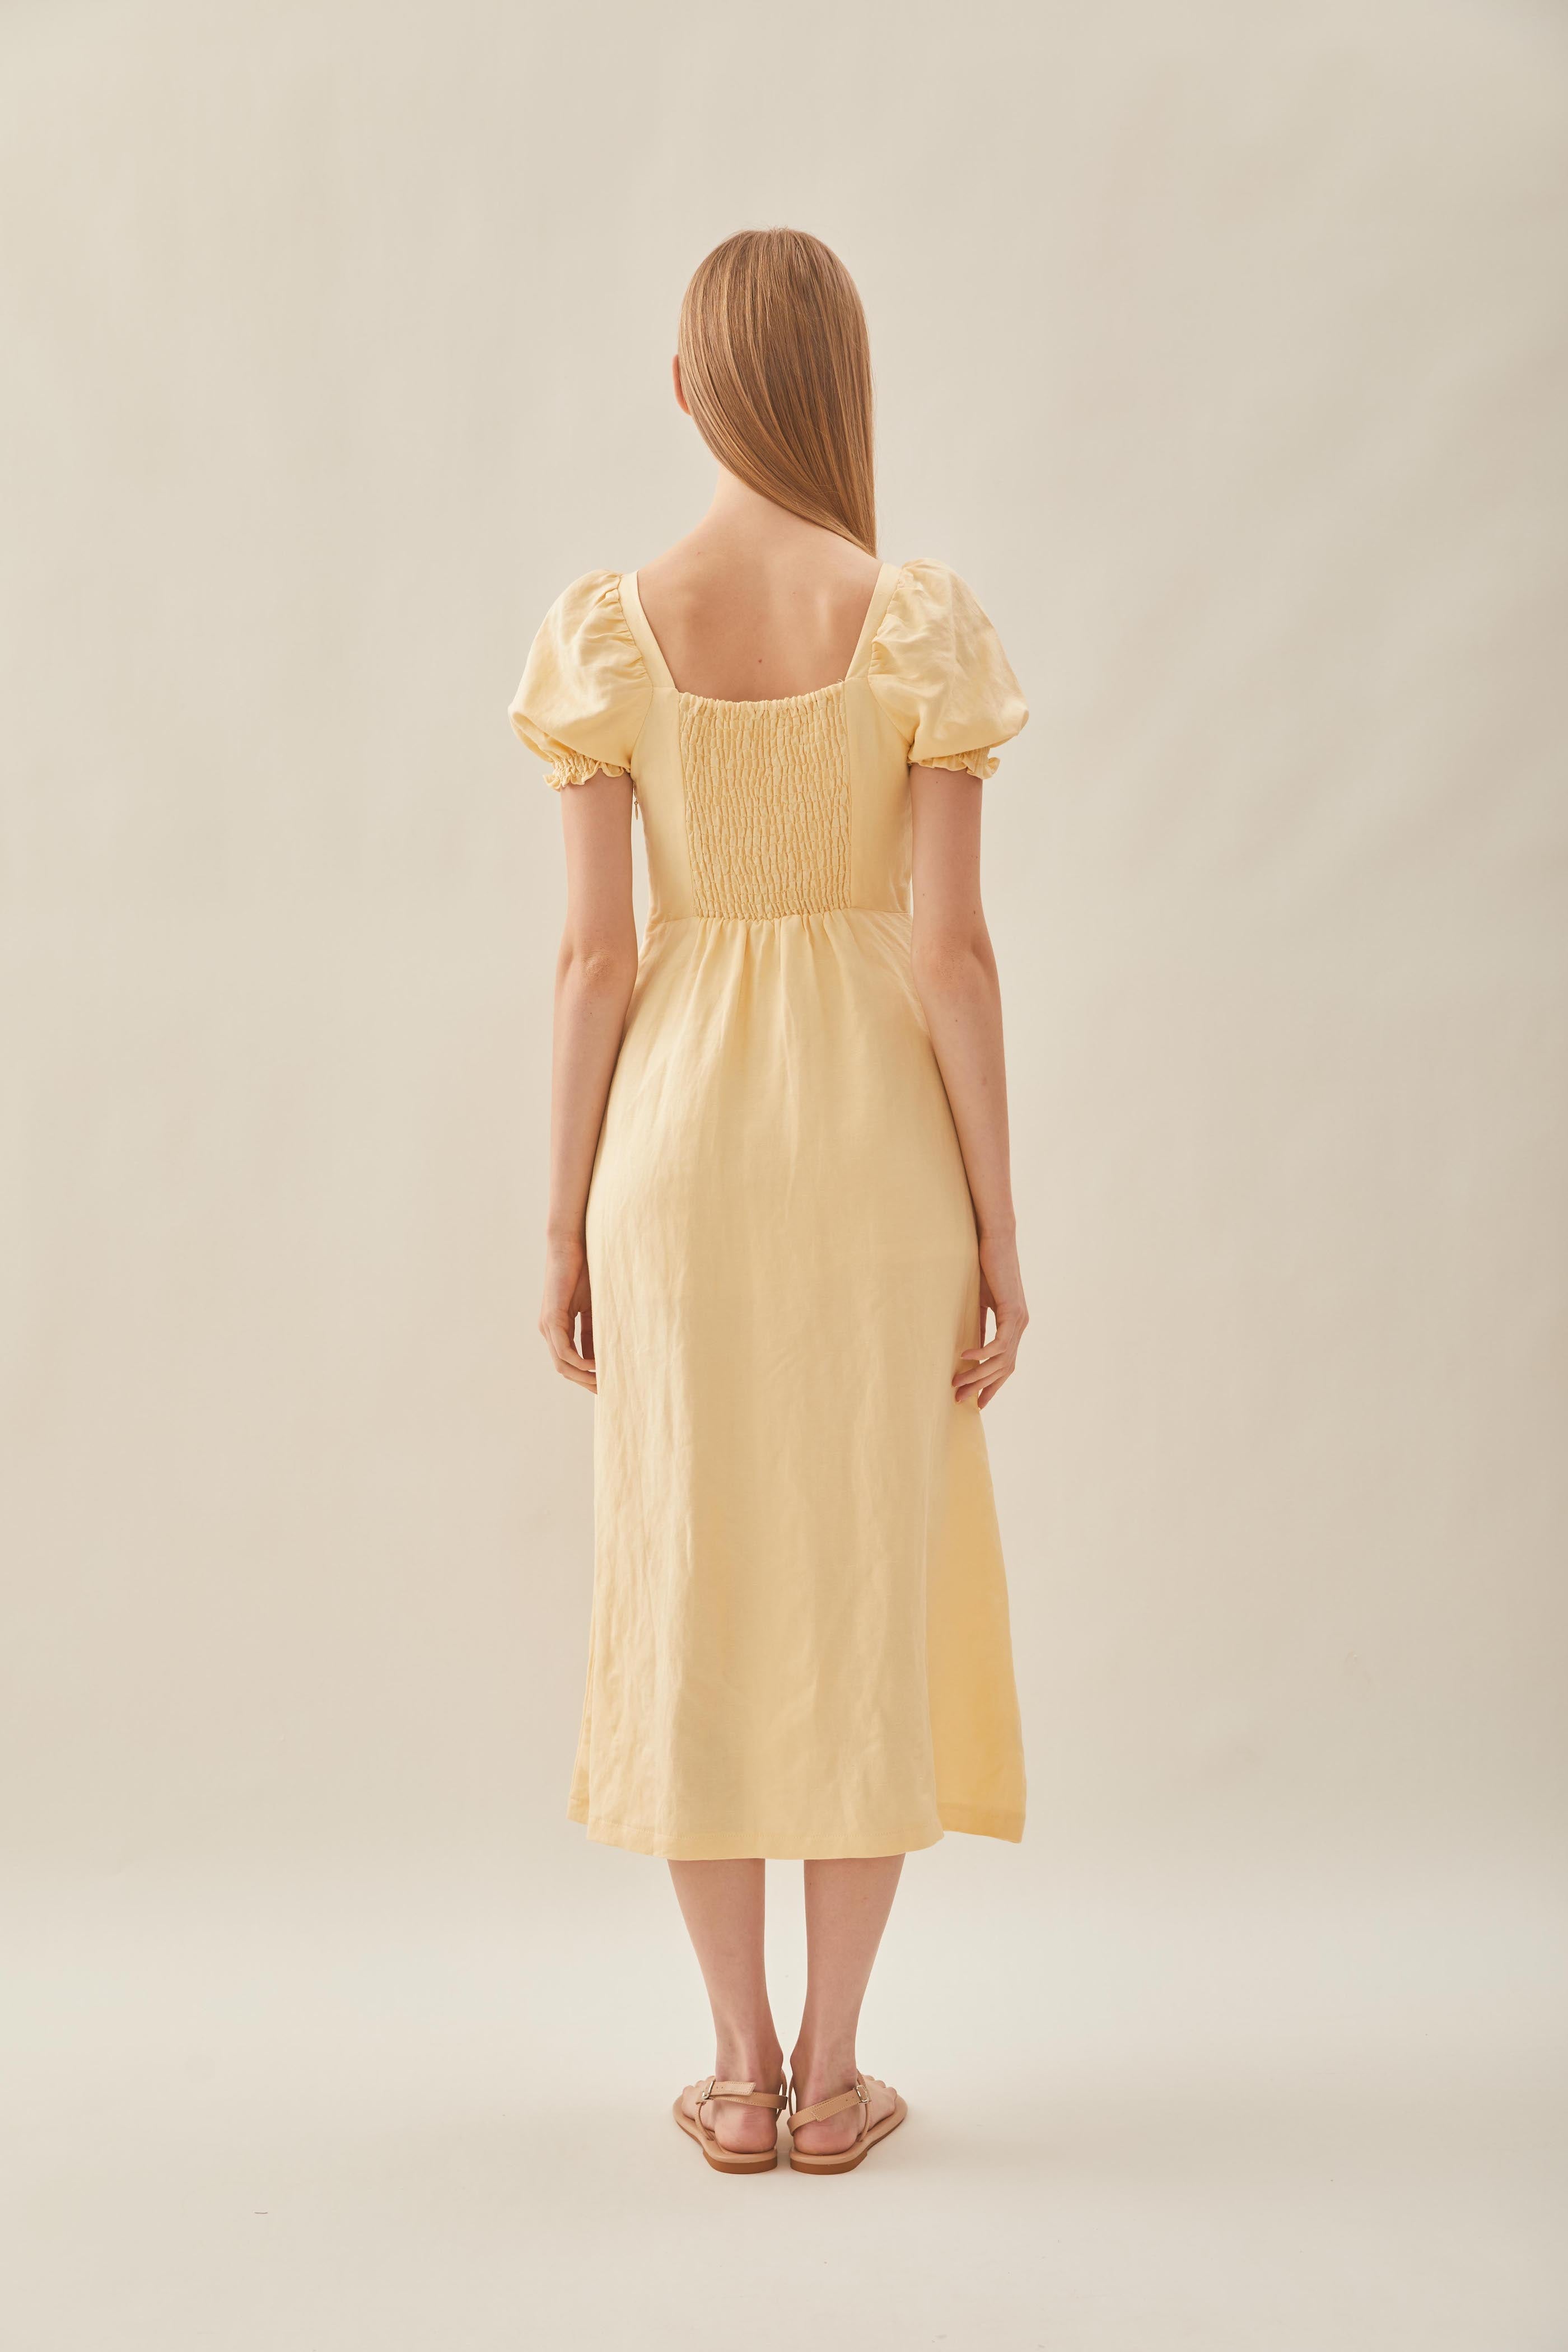 Puffed Sleeve Dress in Pale Yellow